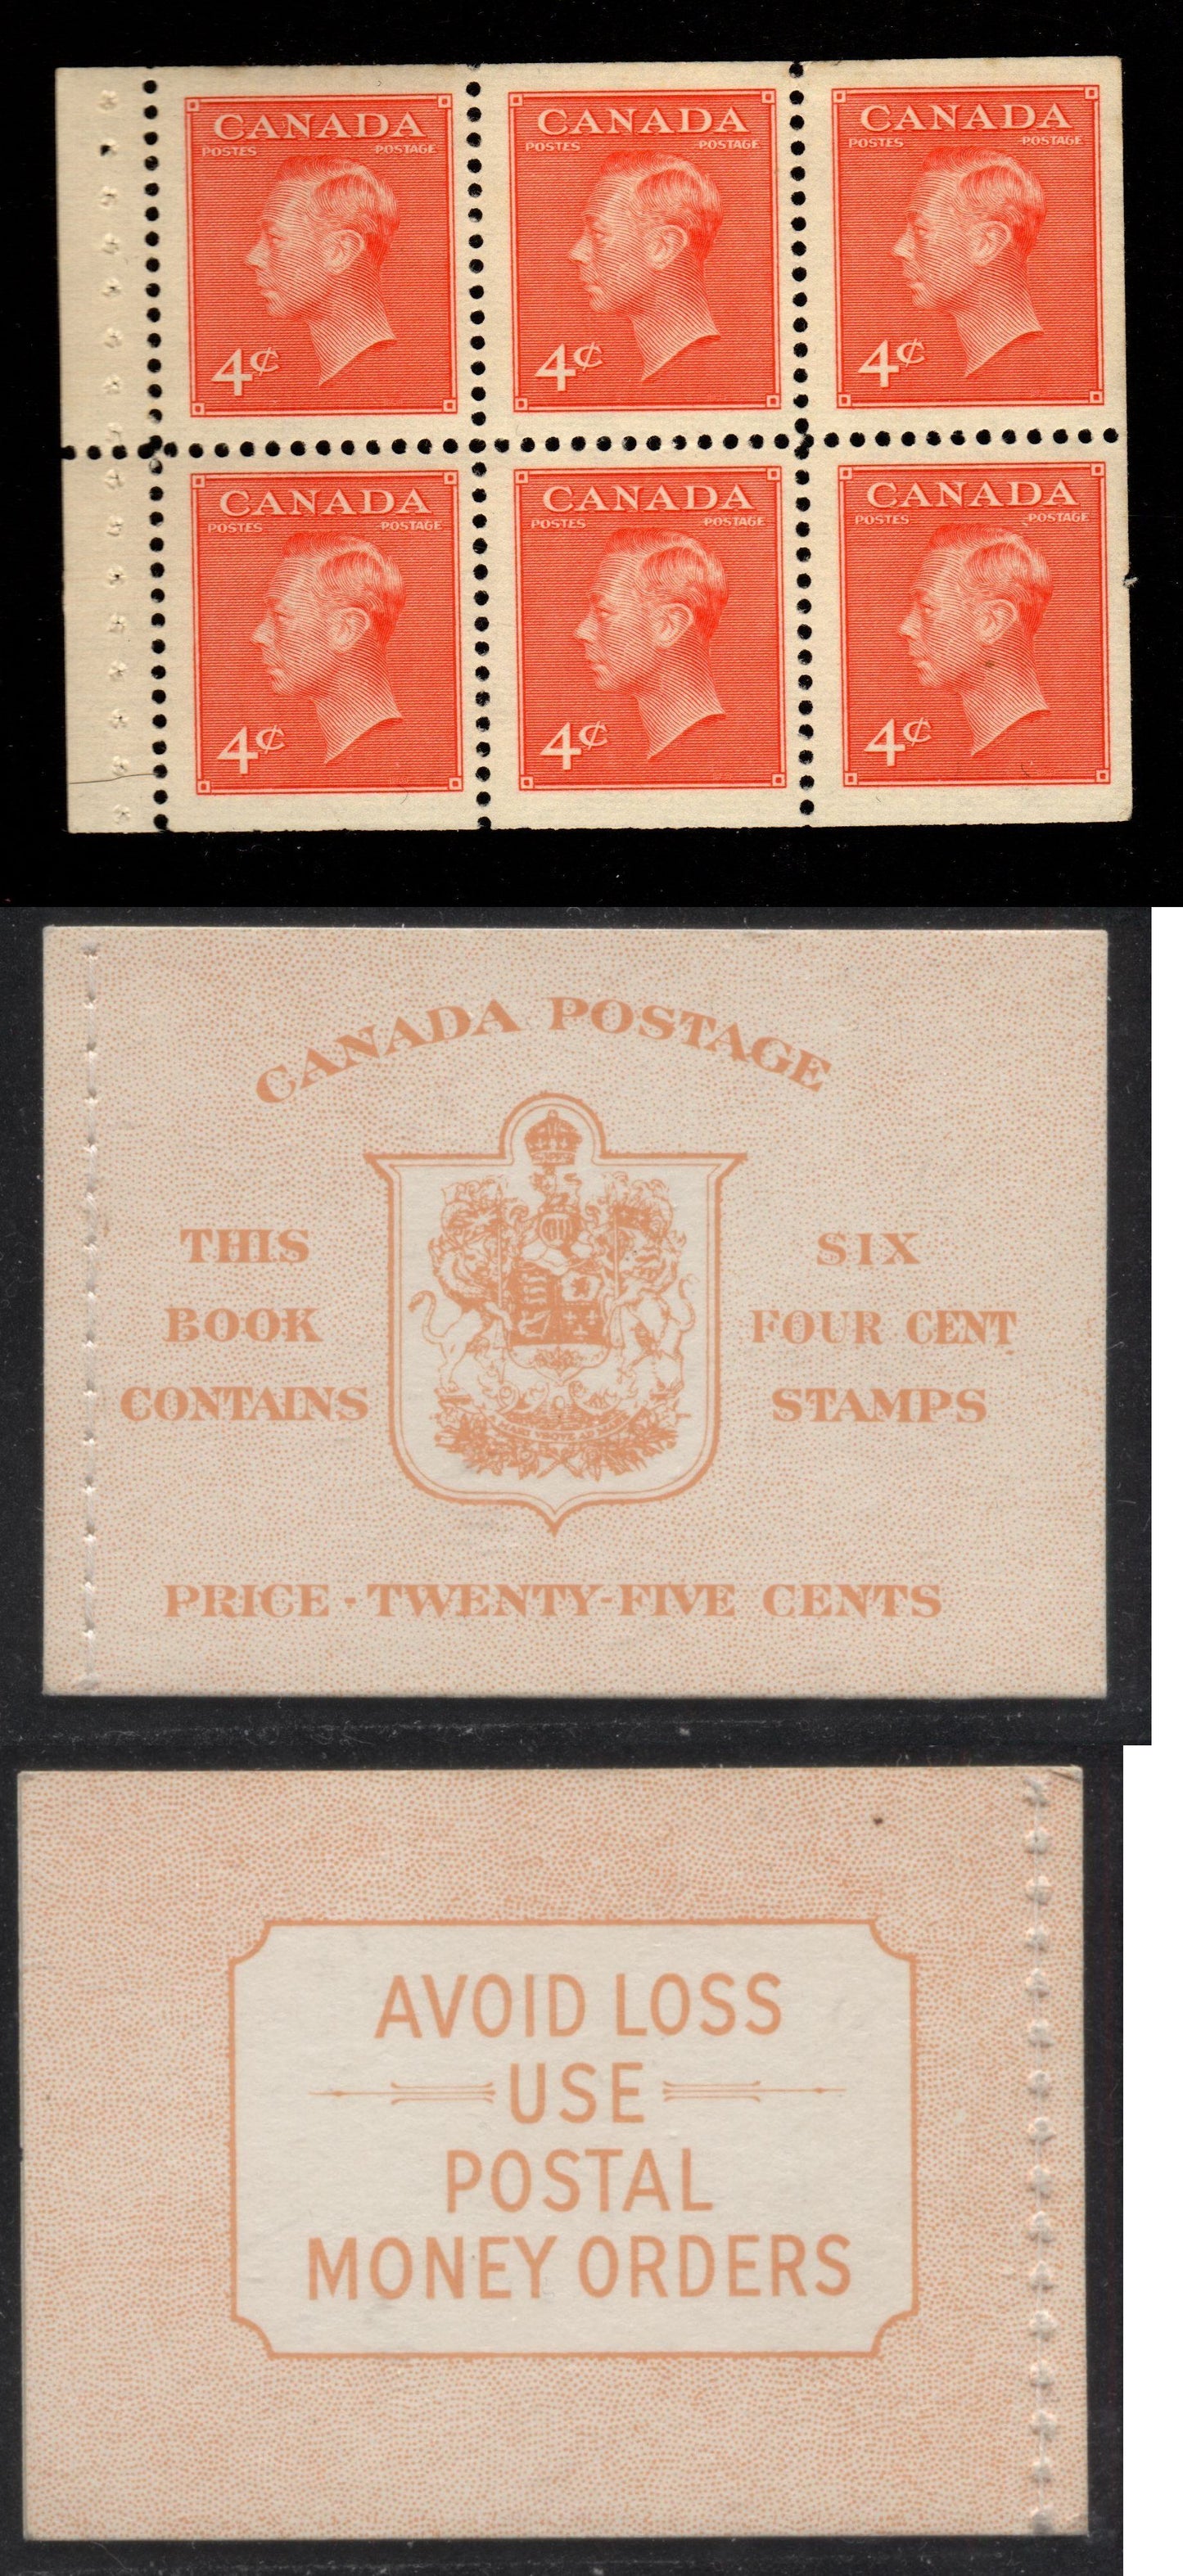 Canada #BK42b 1949-1953 Postes-Postage Issue Complete 25c, English Booklet Containing 1 Pane of 6 of the 4c Orange King George VI Harris Front Cover Type IIi , Back Cover Eii, No Rate Page, Stitched Binding Brixton Chrome 